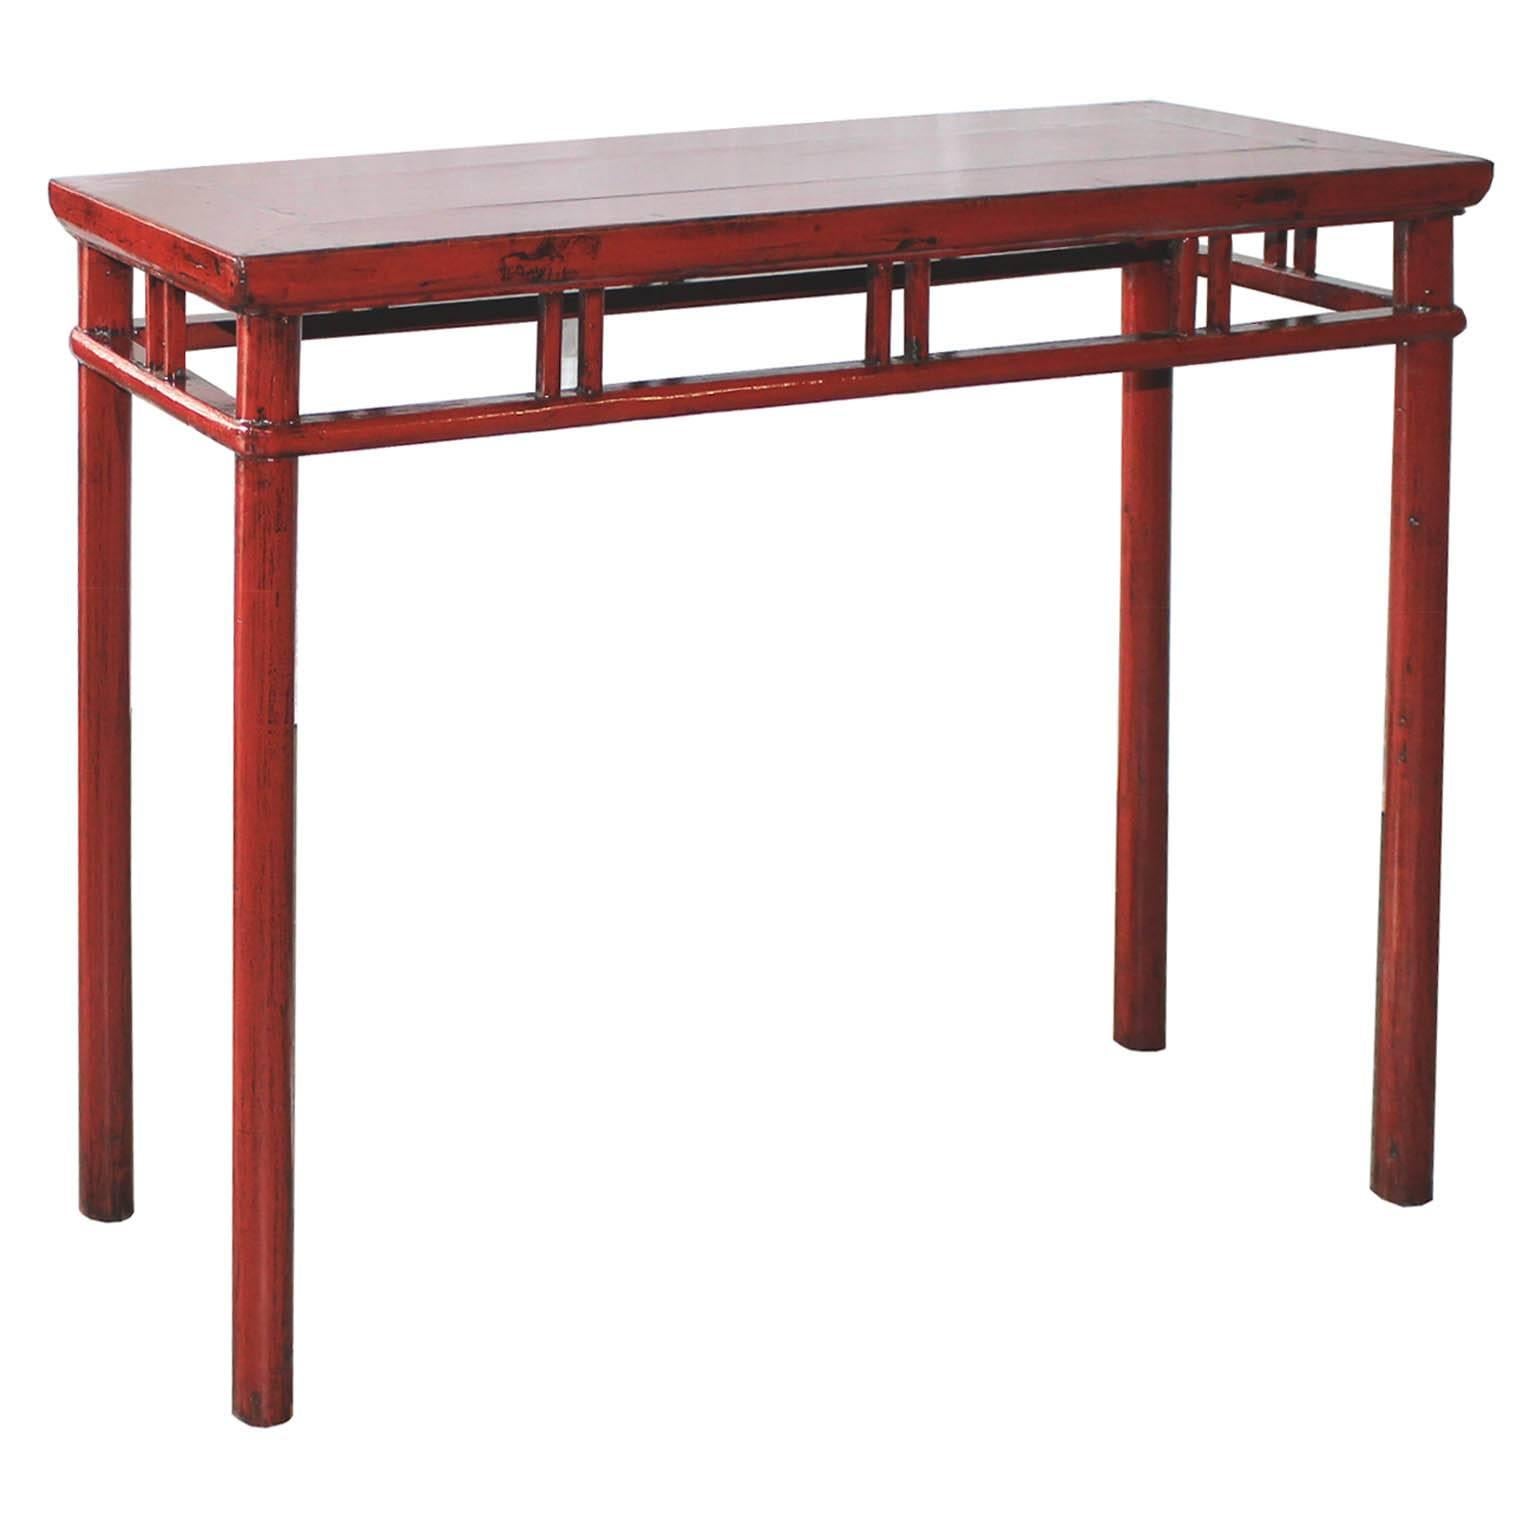 Red console table with support bars and rounded legs. Use in a contemporary interior behind a sofa or in an entry way for a pop of color, China, circa 1890s.